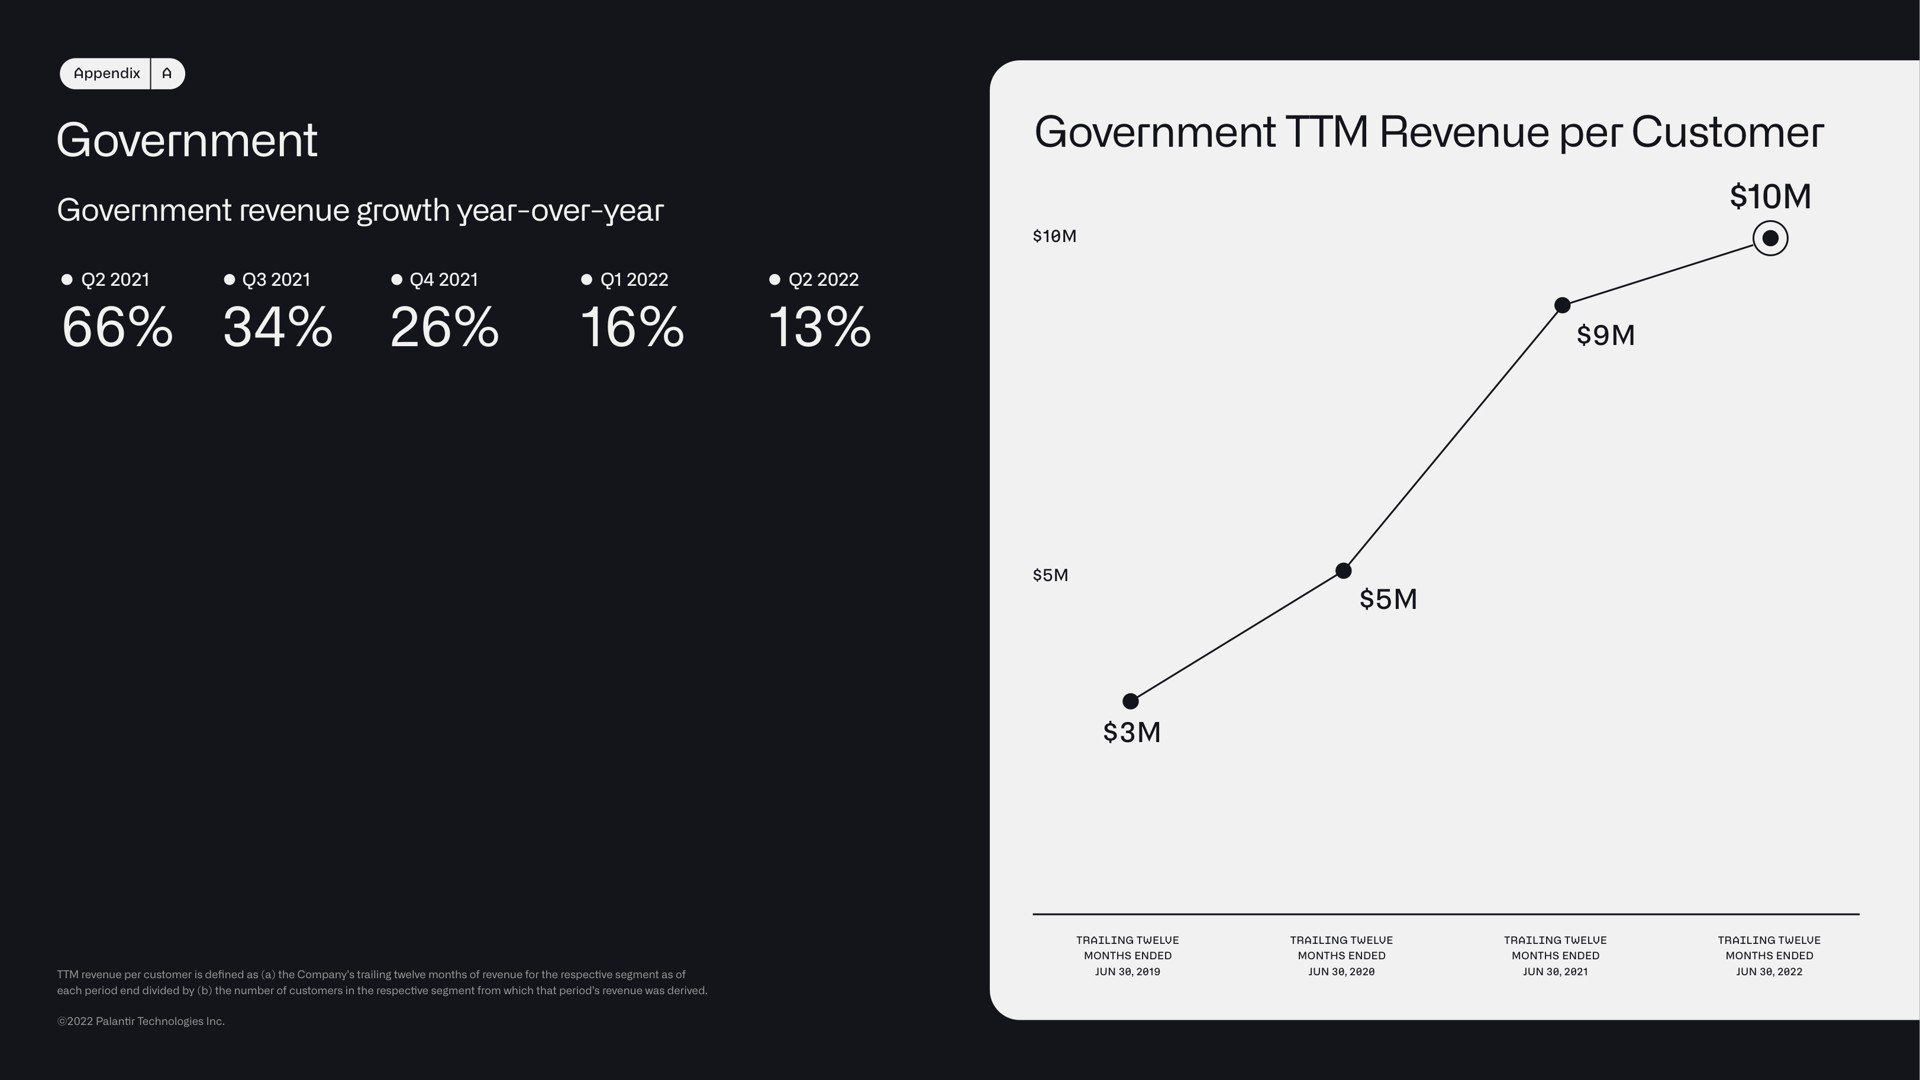 government government revenue growth year over year government revenue per customer a | Palantir